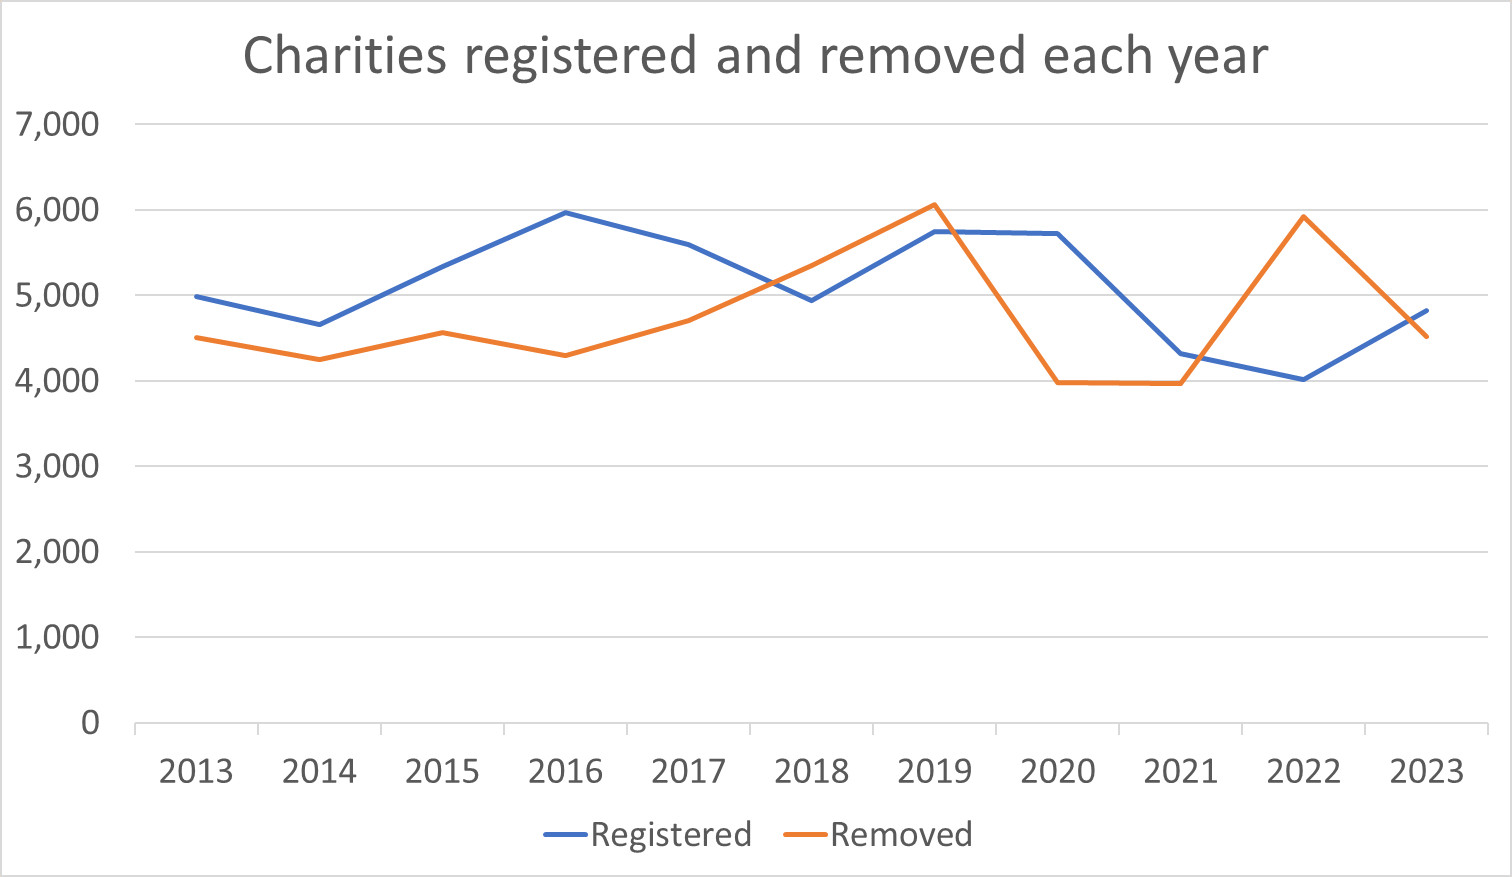 charities registered and removed each year line graph.jpg